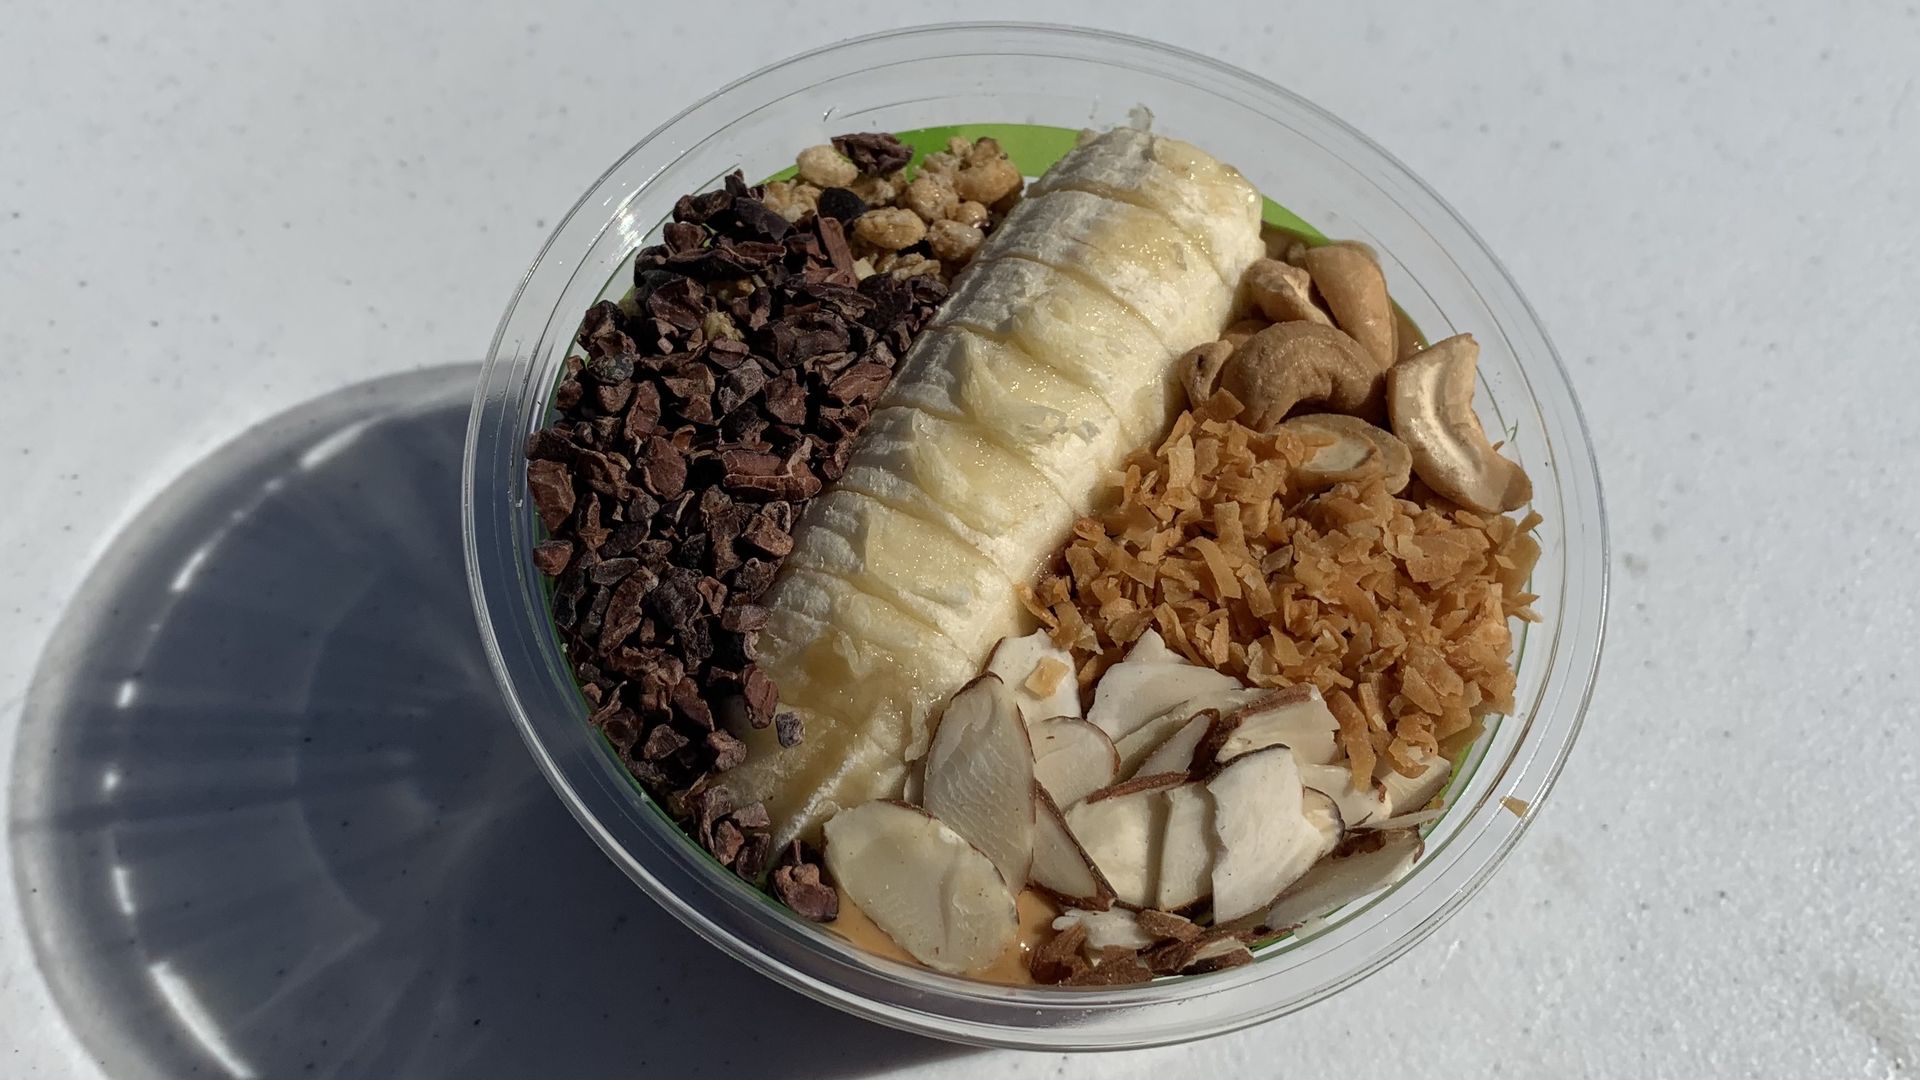 the amazon protein bowl with açaí and peanut butter topped with granola, banana, almonds, cashews, cacao nibs and coconut shavings